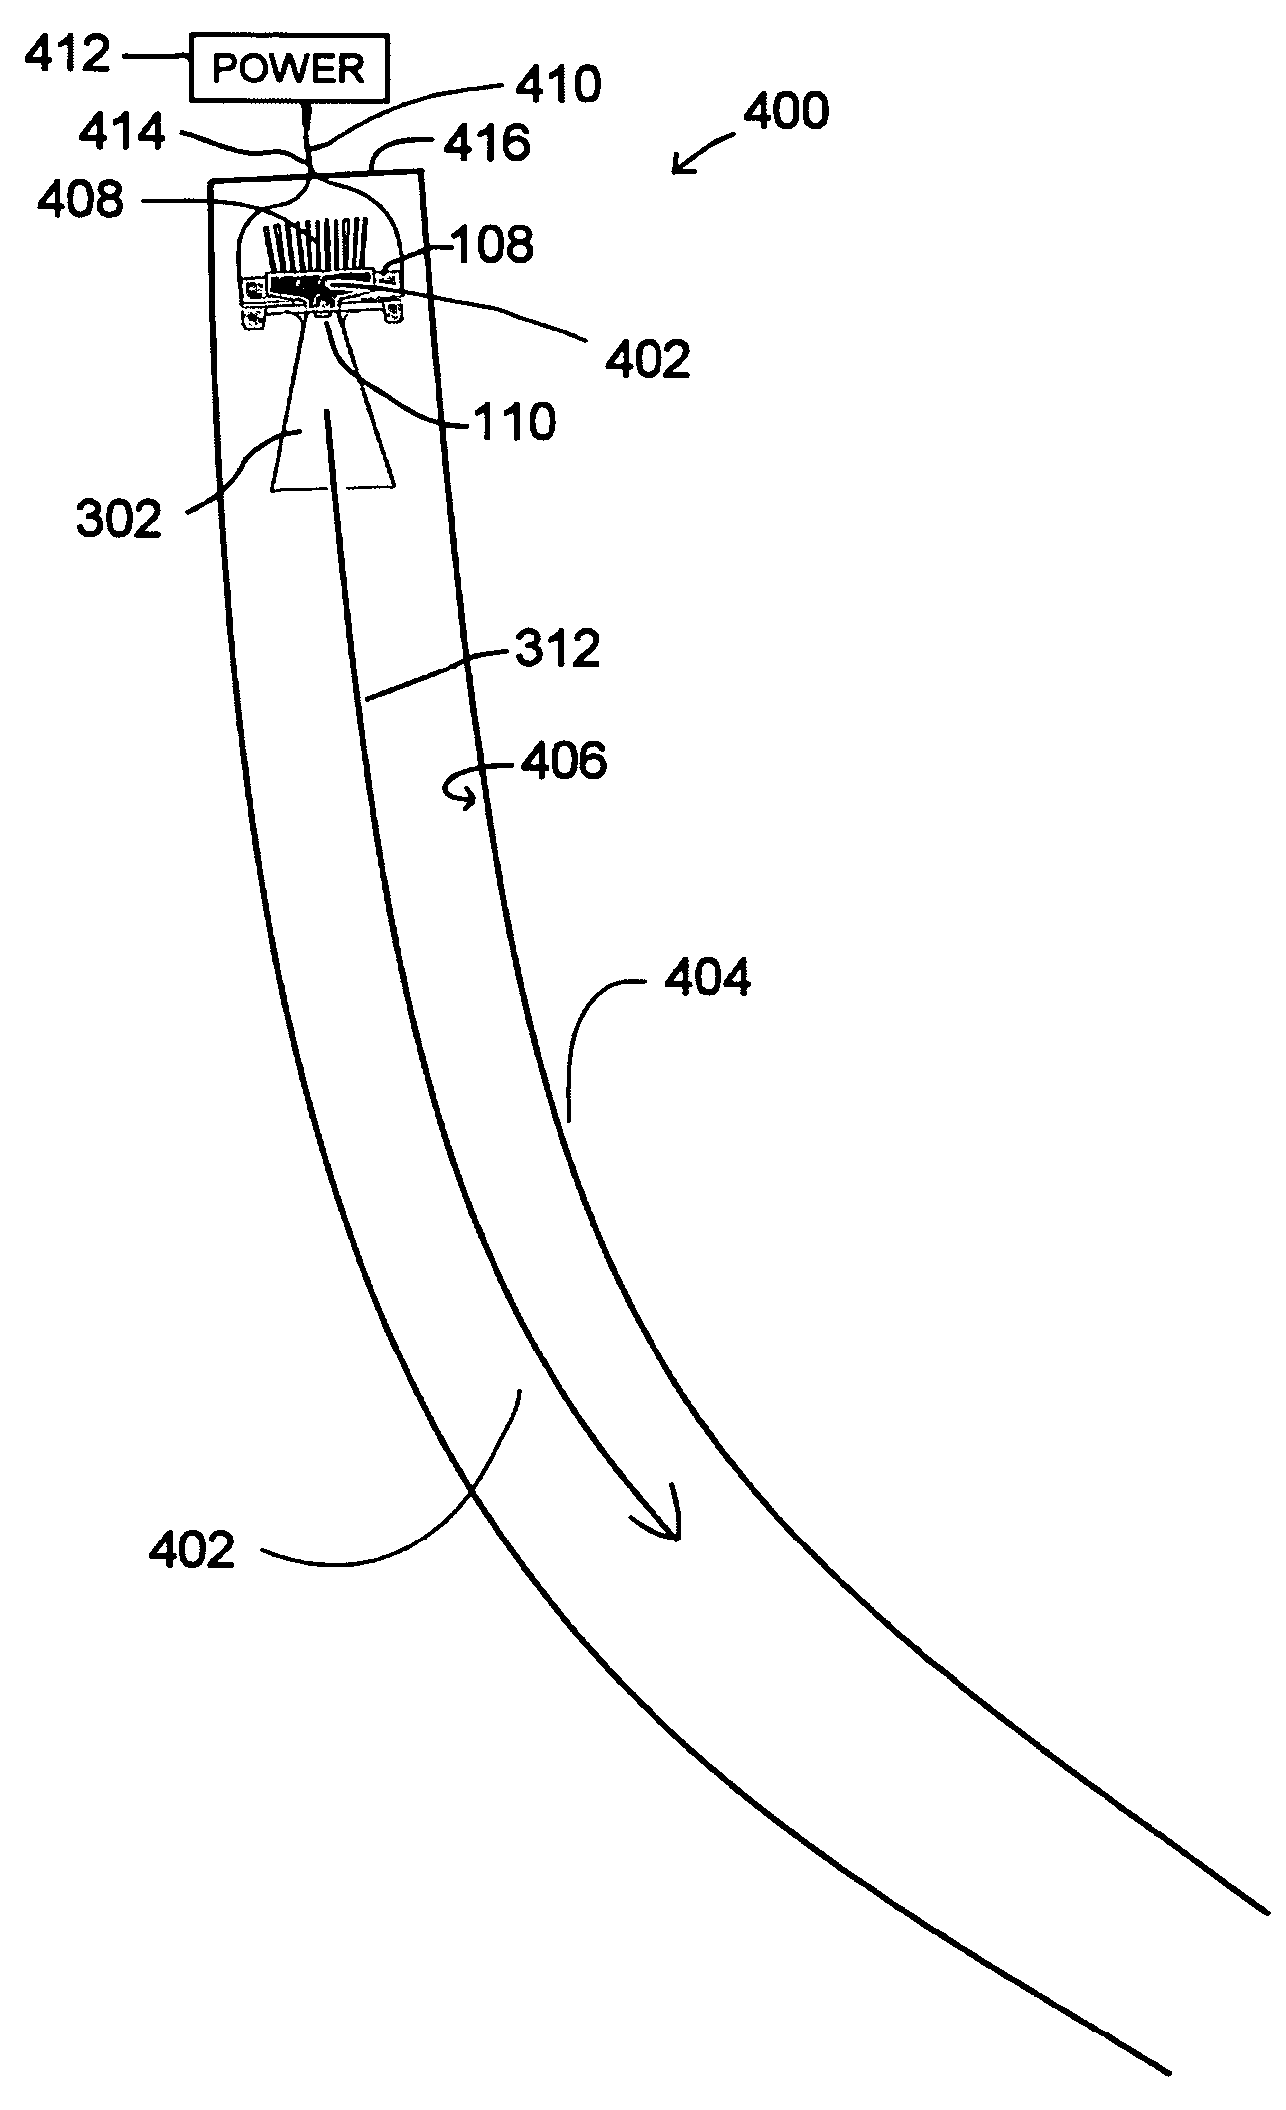 Light insertion and dispersion system